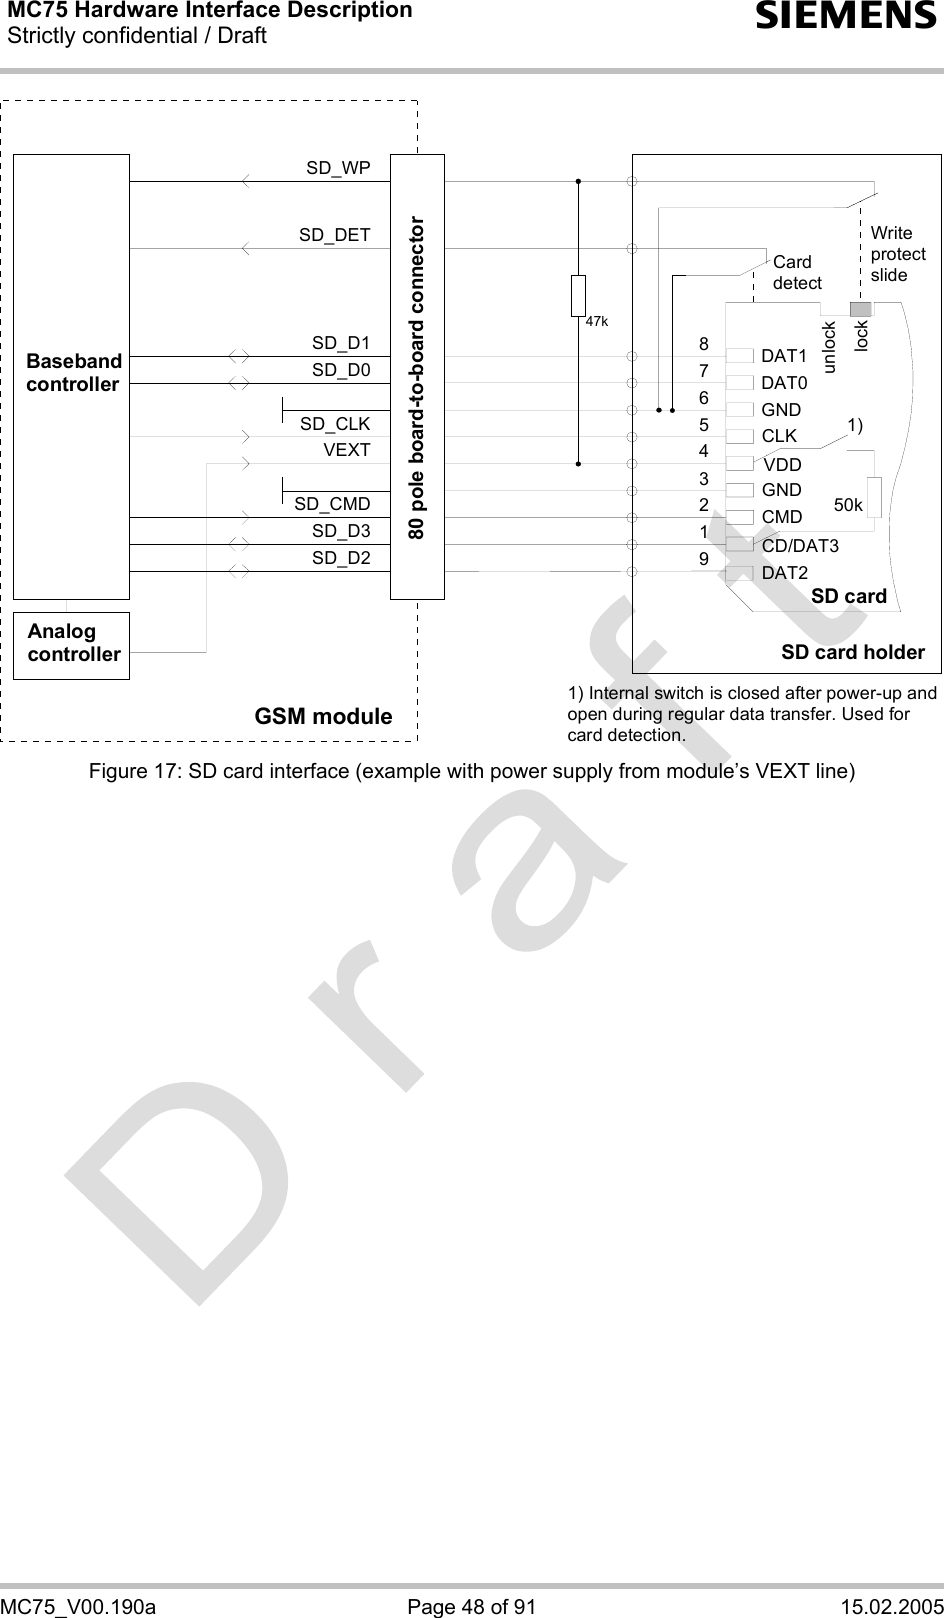 MC75 Hardware Interface Description Strictly confidential / Draft  s MC75_V00.190a  Page 48 of 91  15.02.2005 SD_CLKSD_CMDSD_WPSD_D0SD_D1SD_D2SD_D3VEXT876543219DAT1DAT0GNDCLKVDDGNDCMDCD/DAT3DAT2lockunlockWriteprotectslideCarddetectSD card holderSD card50k1)1) Internal switch is closed after power-up and open during regular data transfer. Used for card detection.SD_DET47kGSM module80 pole board-to-board connectorBasebandcontrollerAnalog controller Figure 17: SD card interface (example with power supply from module’s VEXT line)  